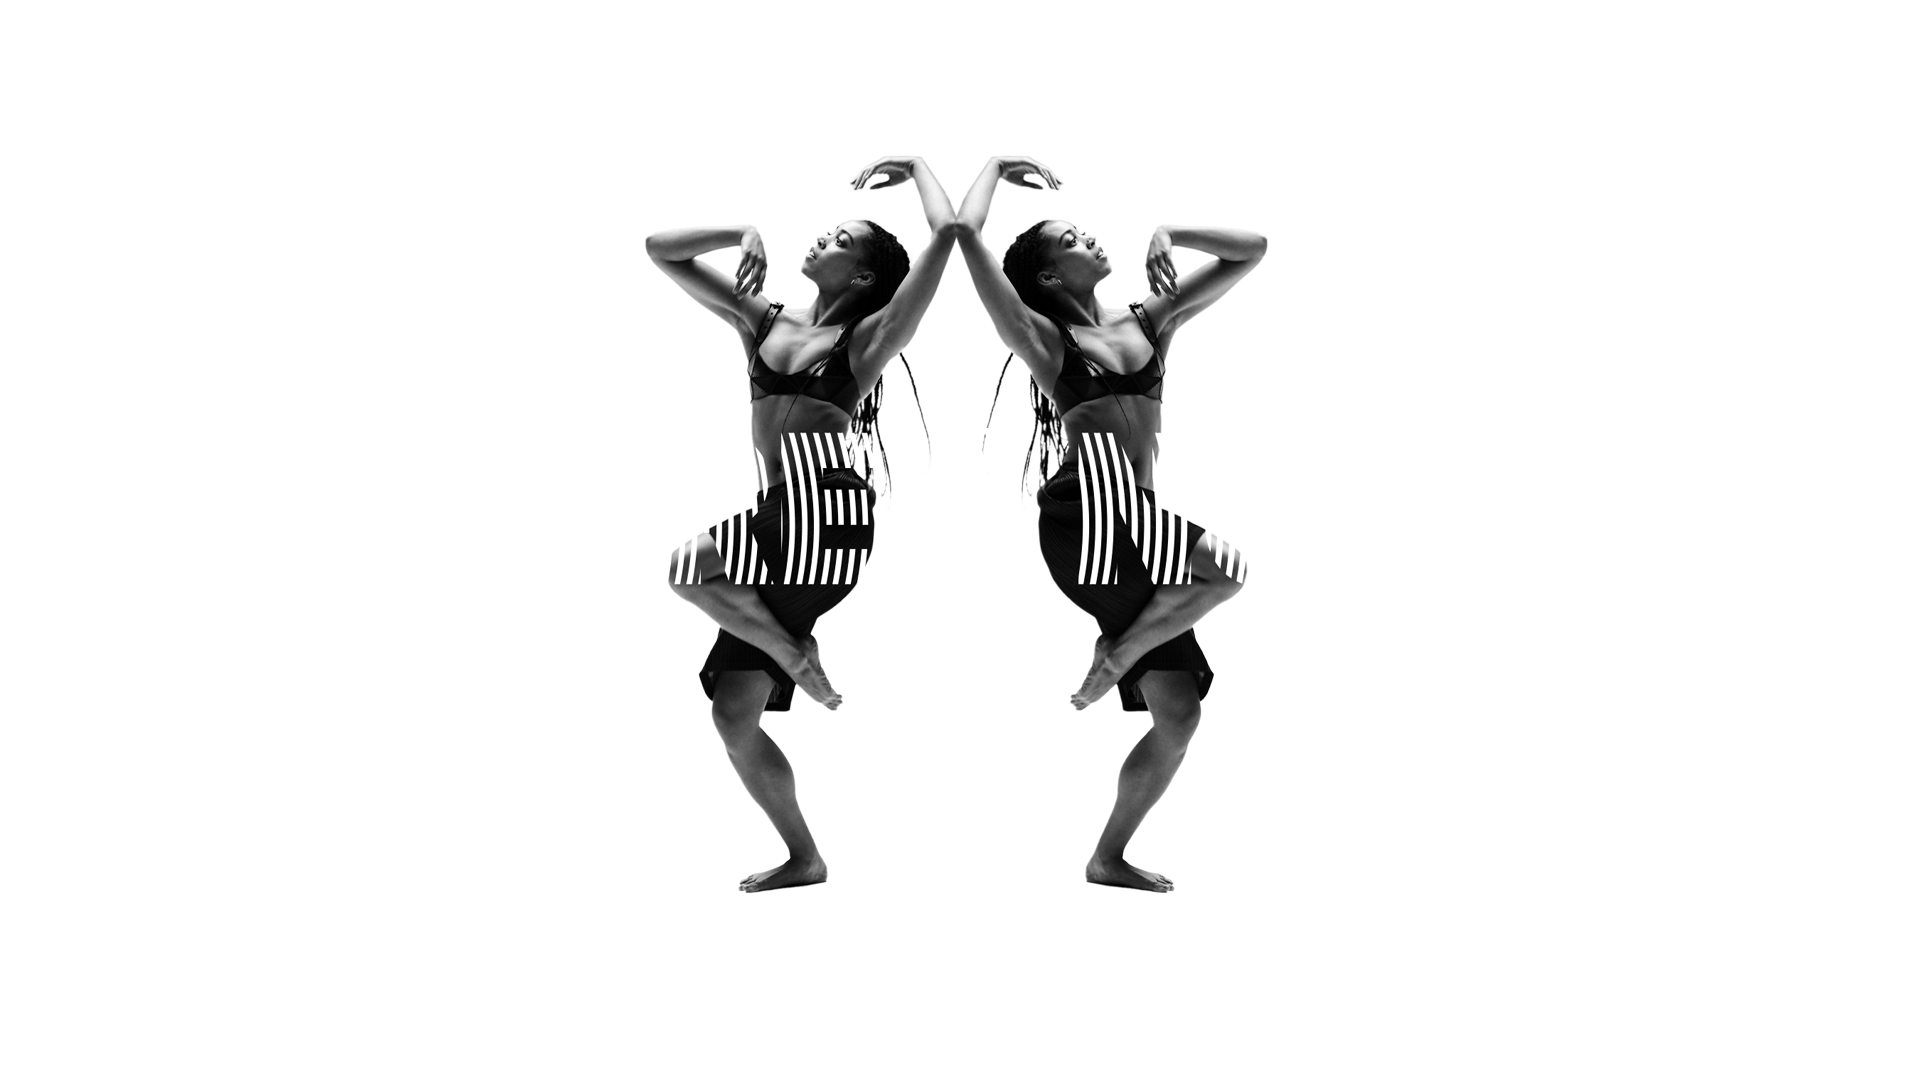 HERE / NOW